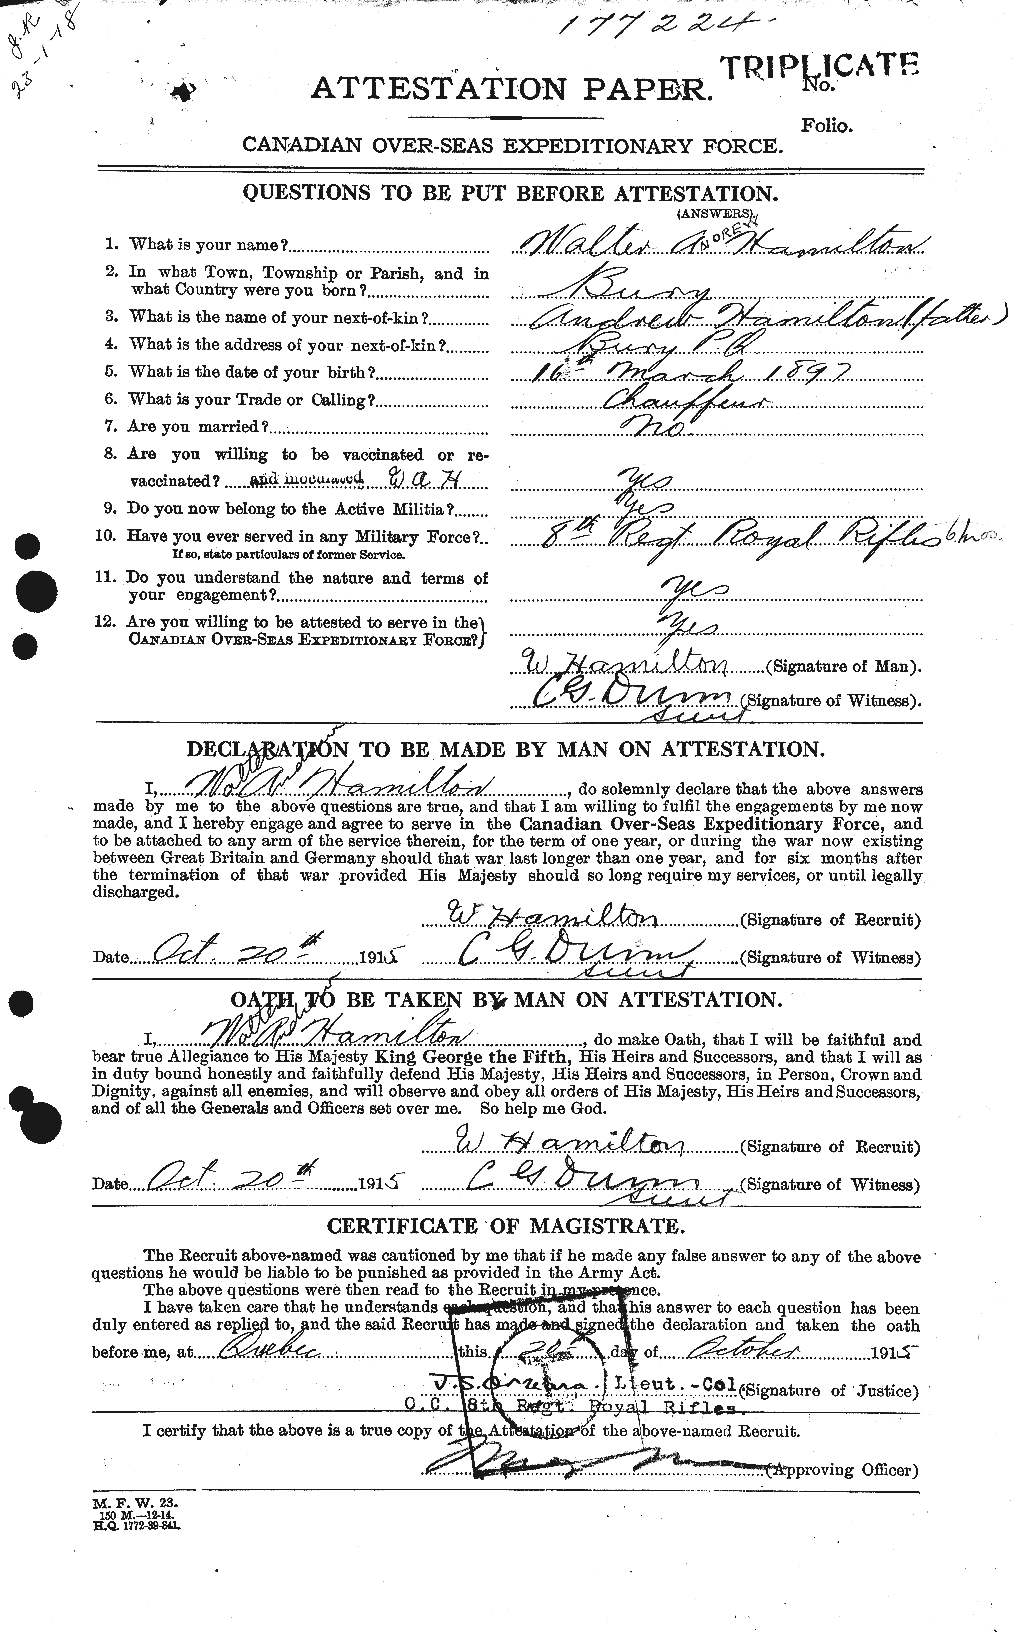 Personnel Records of the First World War - CEF 374806a